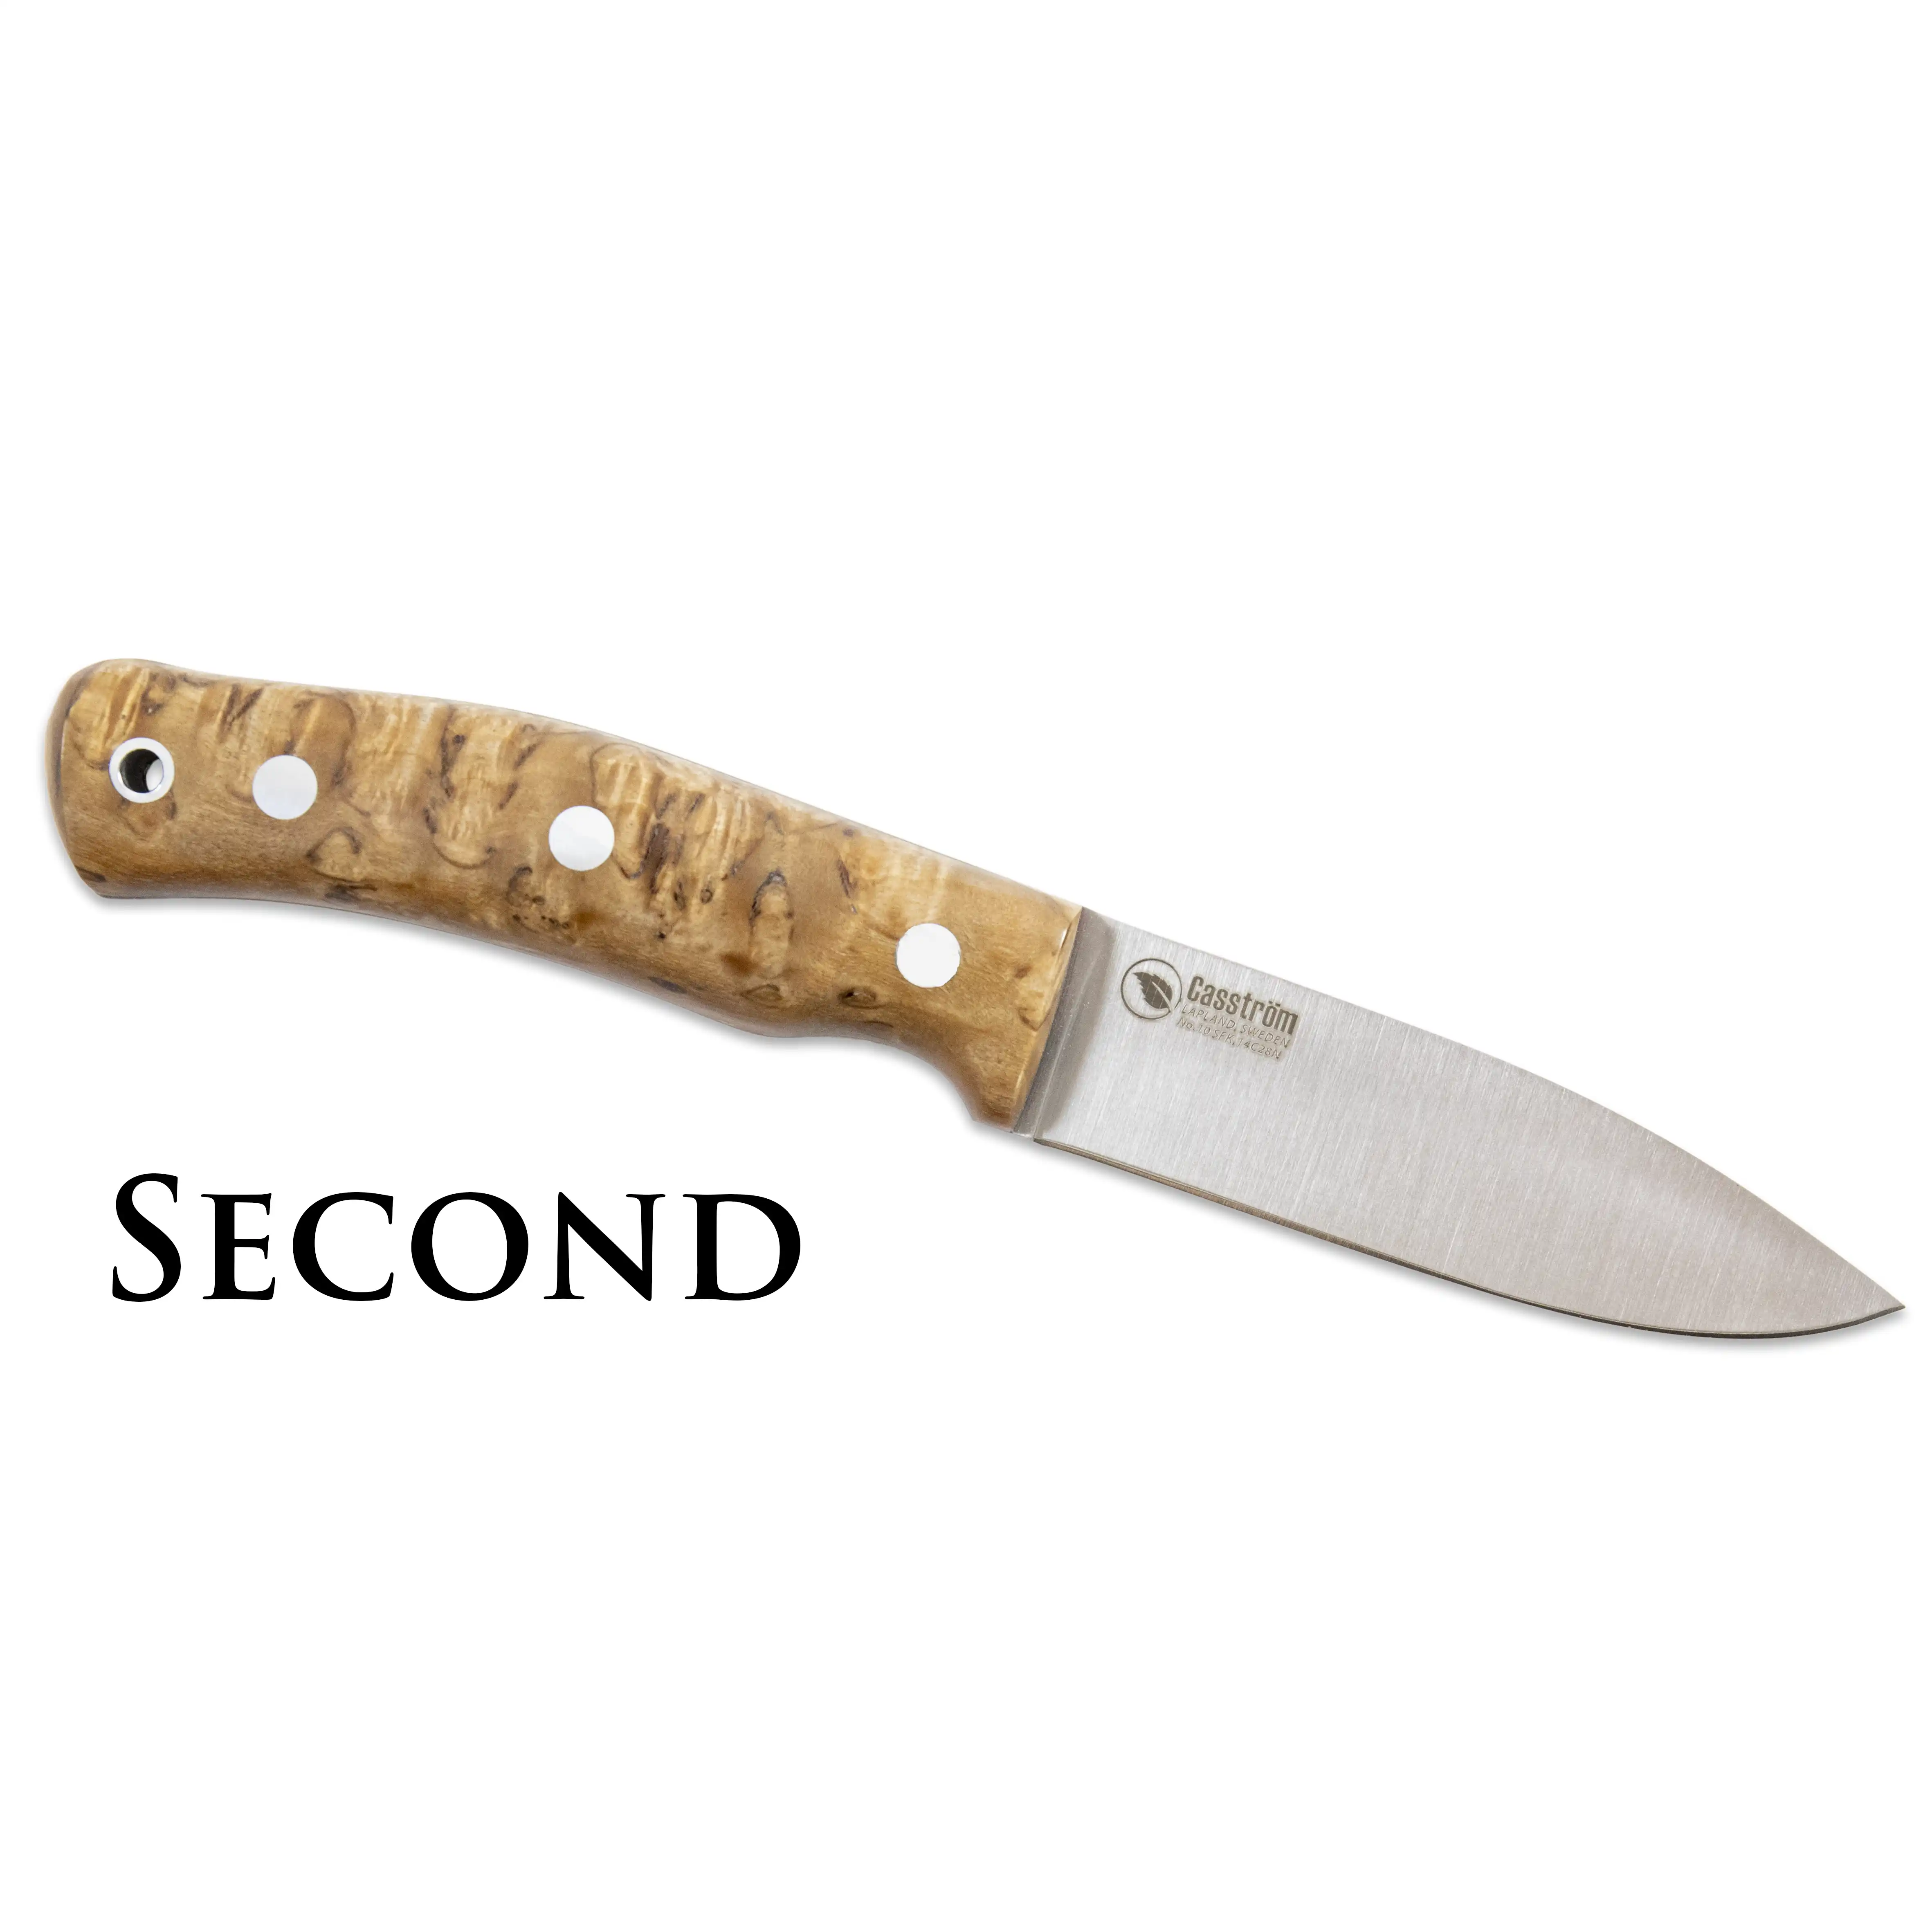 Casstrom Shooting, Fishing & Outdoor products - Casstrom No.10 Swedish  Forest knife - Oak